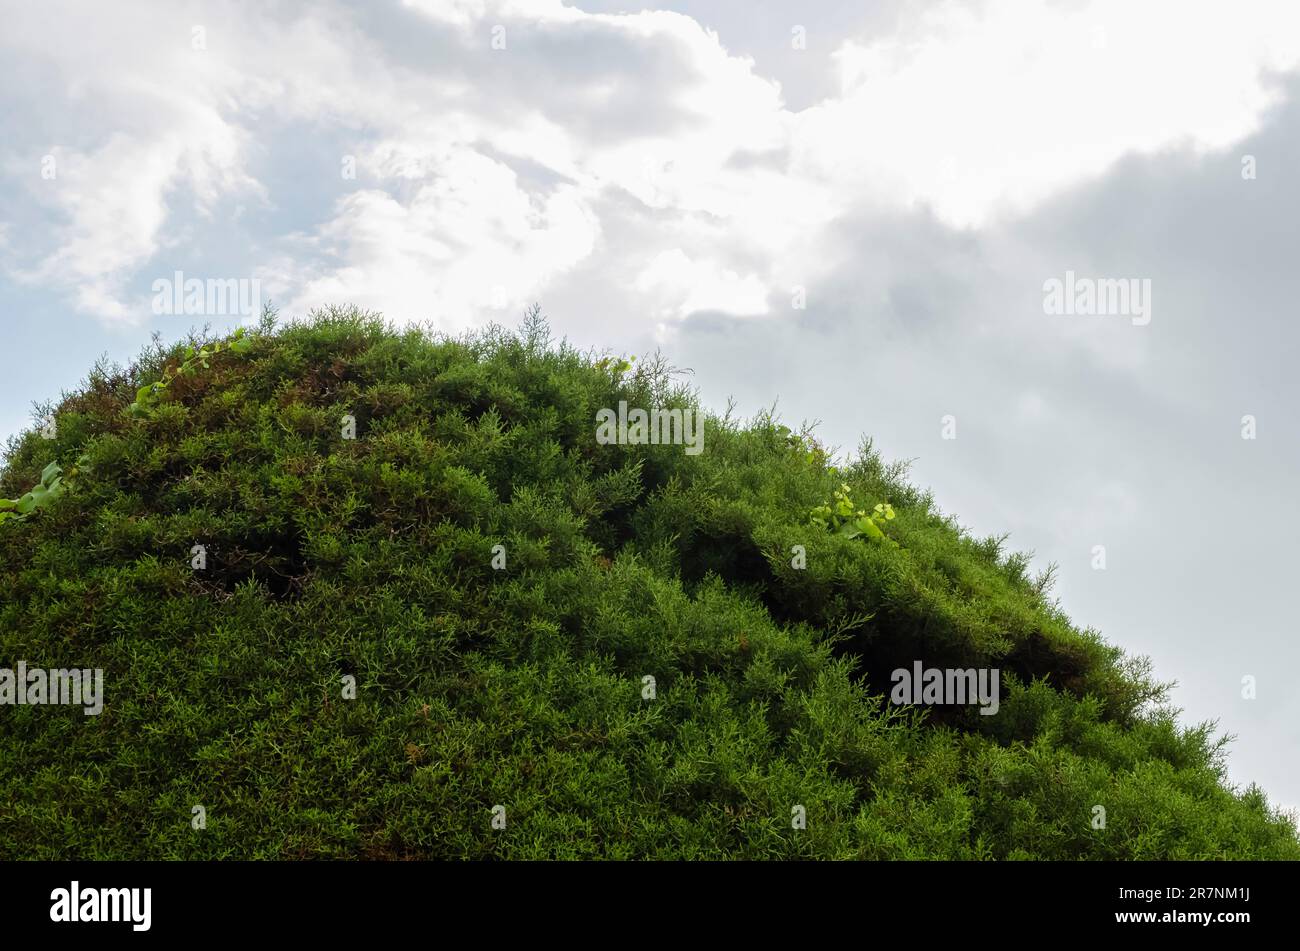 This is the top of a very large Cupressus Macrocarpa conifer tree against the cloudy sky. Stock Photo